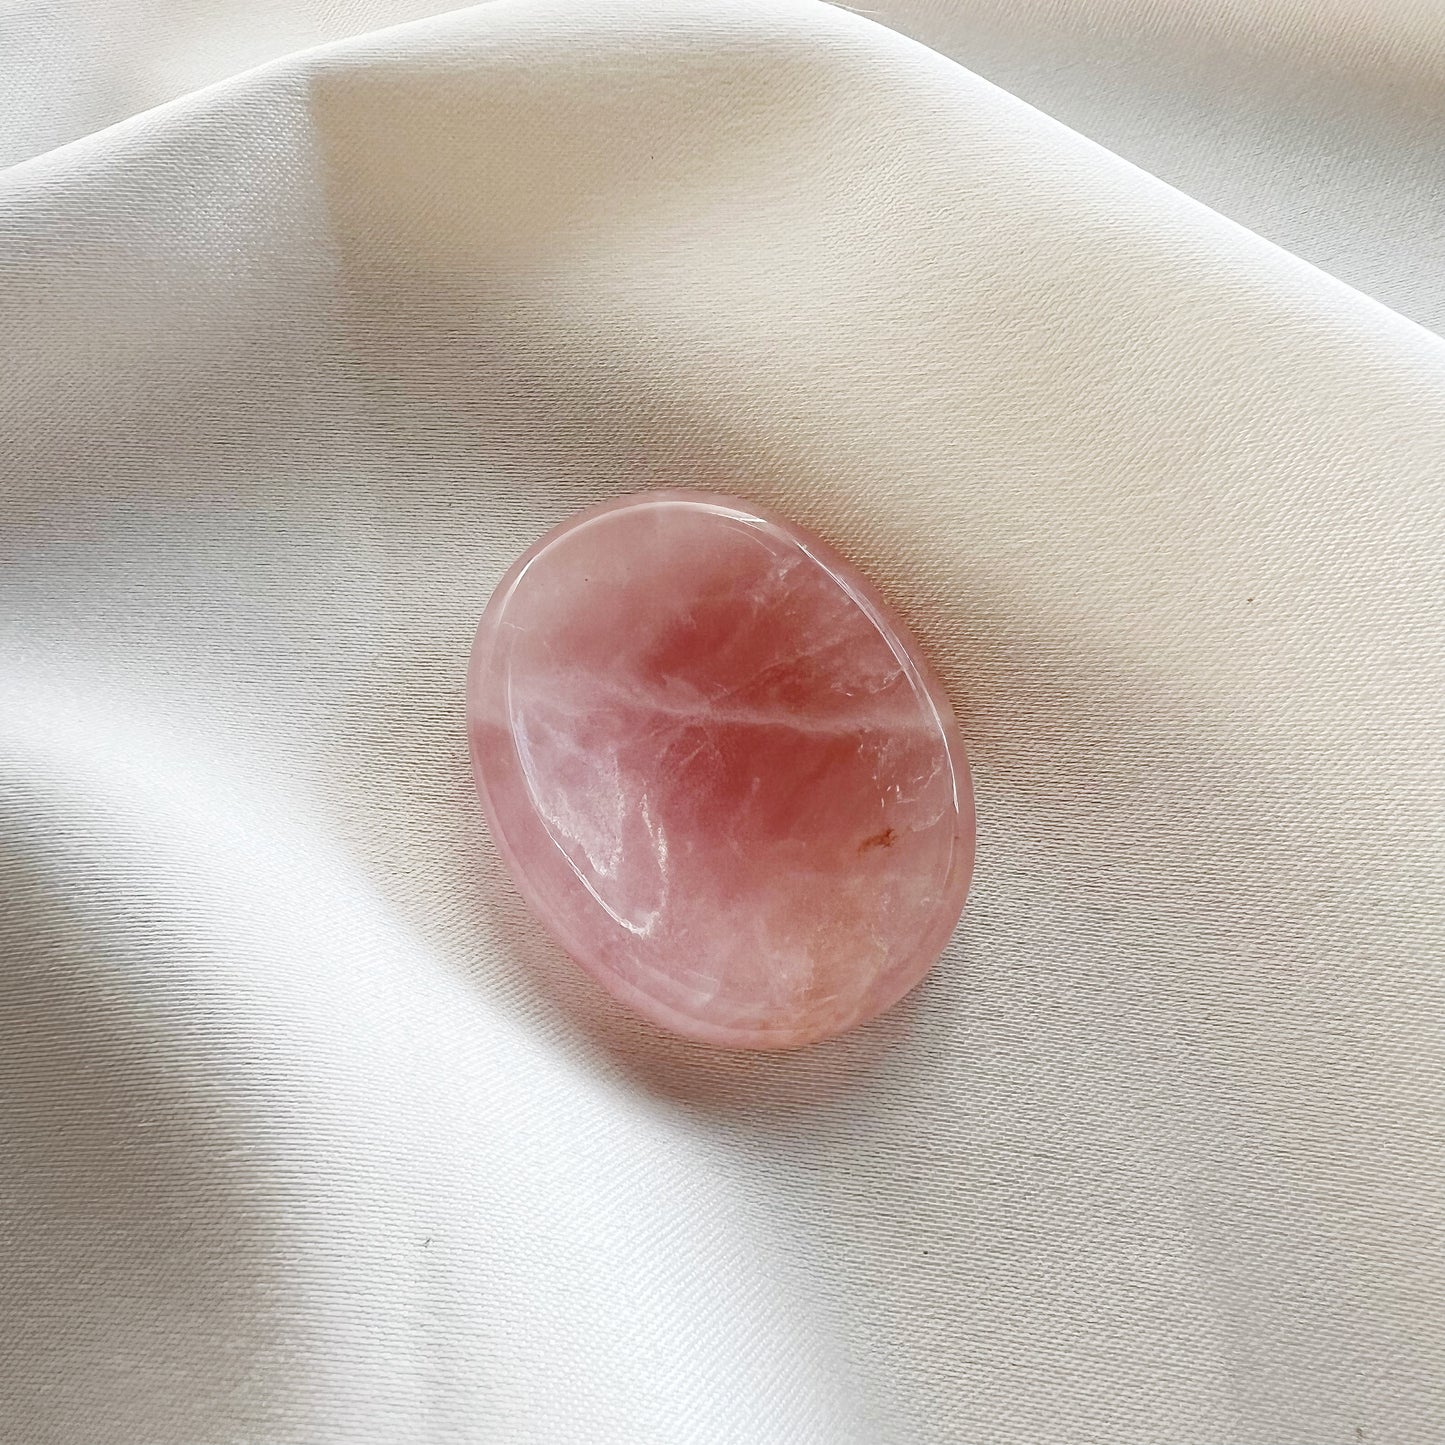 This listing is for one (1) Rose Quartz worry stone. These worry stones have been cleansed and Reiki charged. Each worry stone is truly unique and approximately 1.5" long.